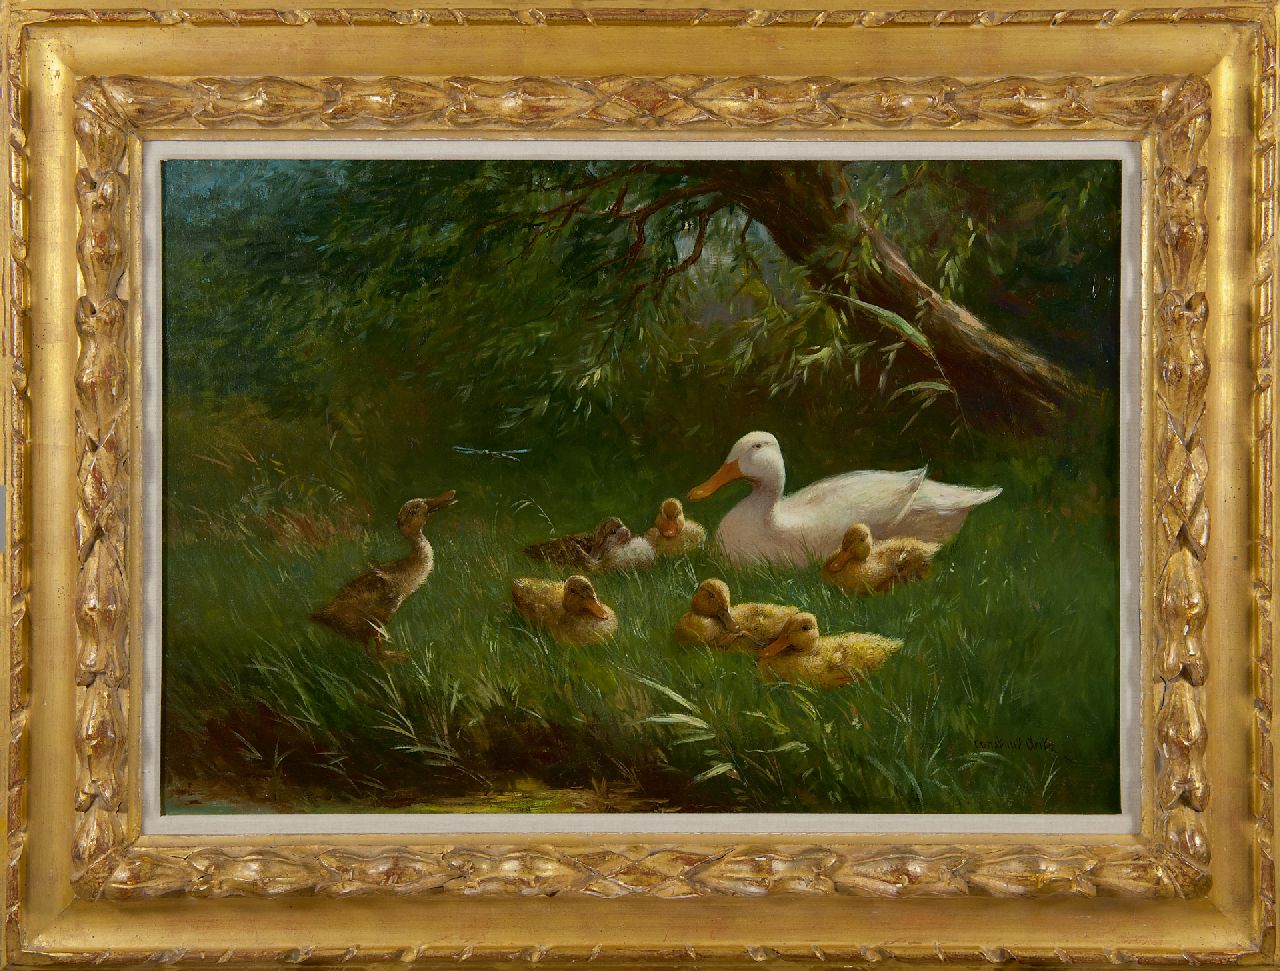 Artz C.D.L.  | 'Constant' David Ludovic Artz | Paintings offered for sale | A duck family, oil on canvas 45.4 x 65.4 cm, signed l.r.